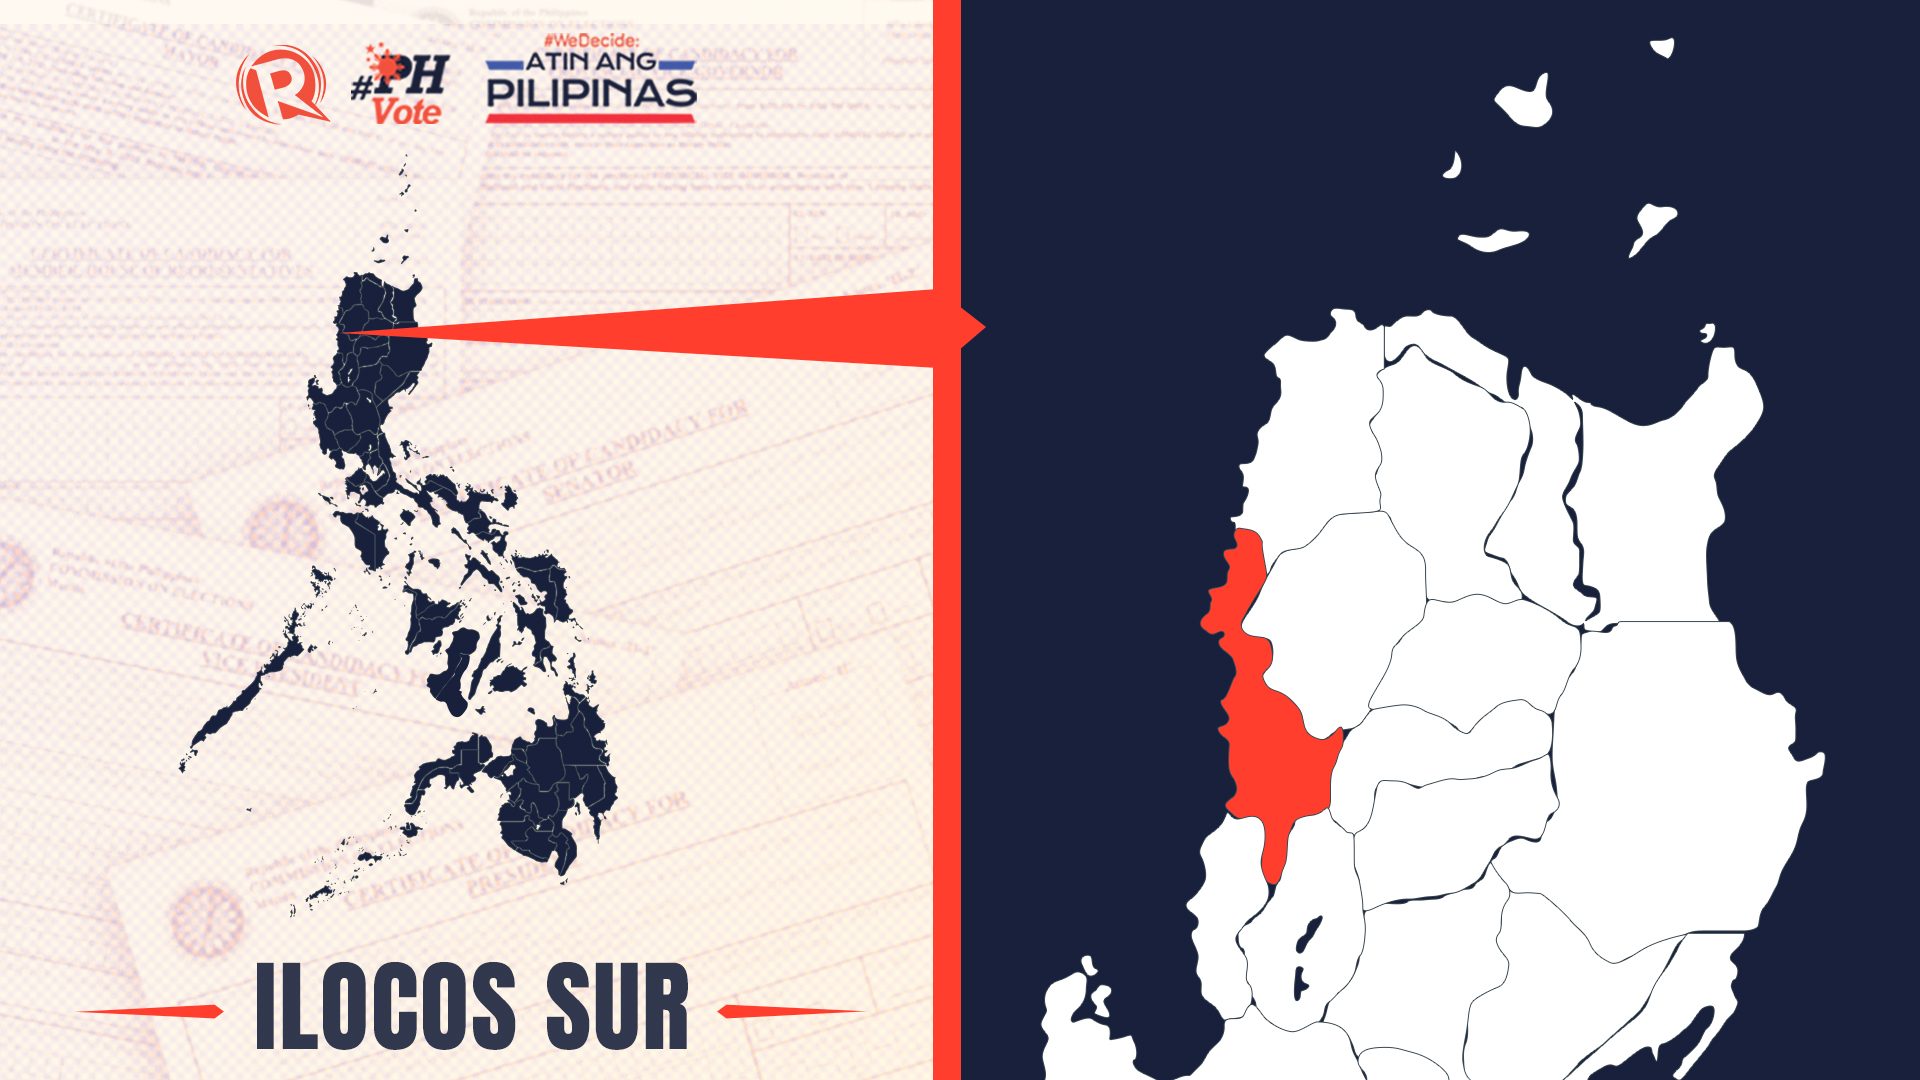 LIST: Who is running in Ilocos Sur in the 2022 Philippine elections?